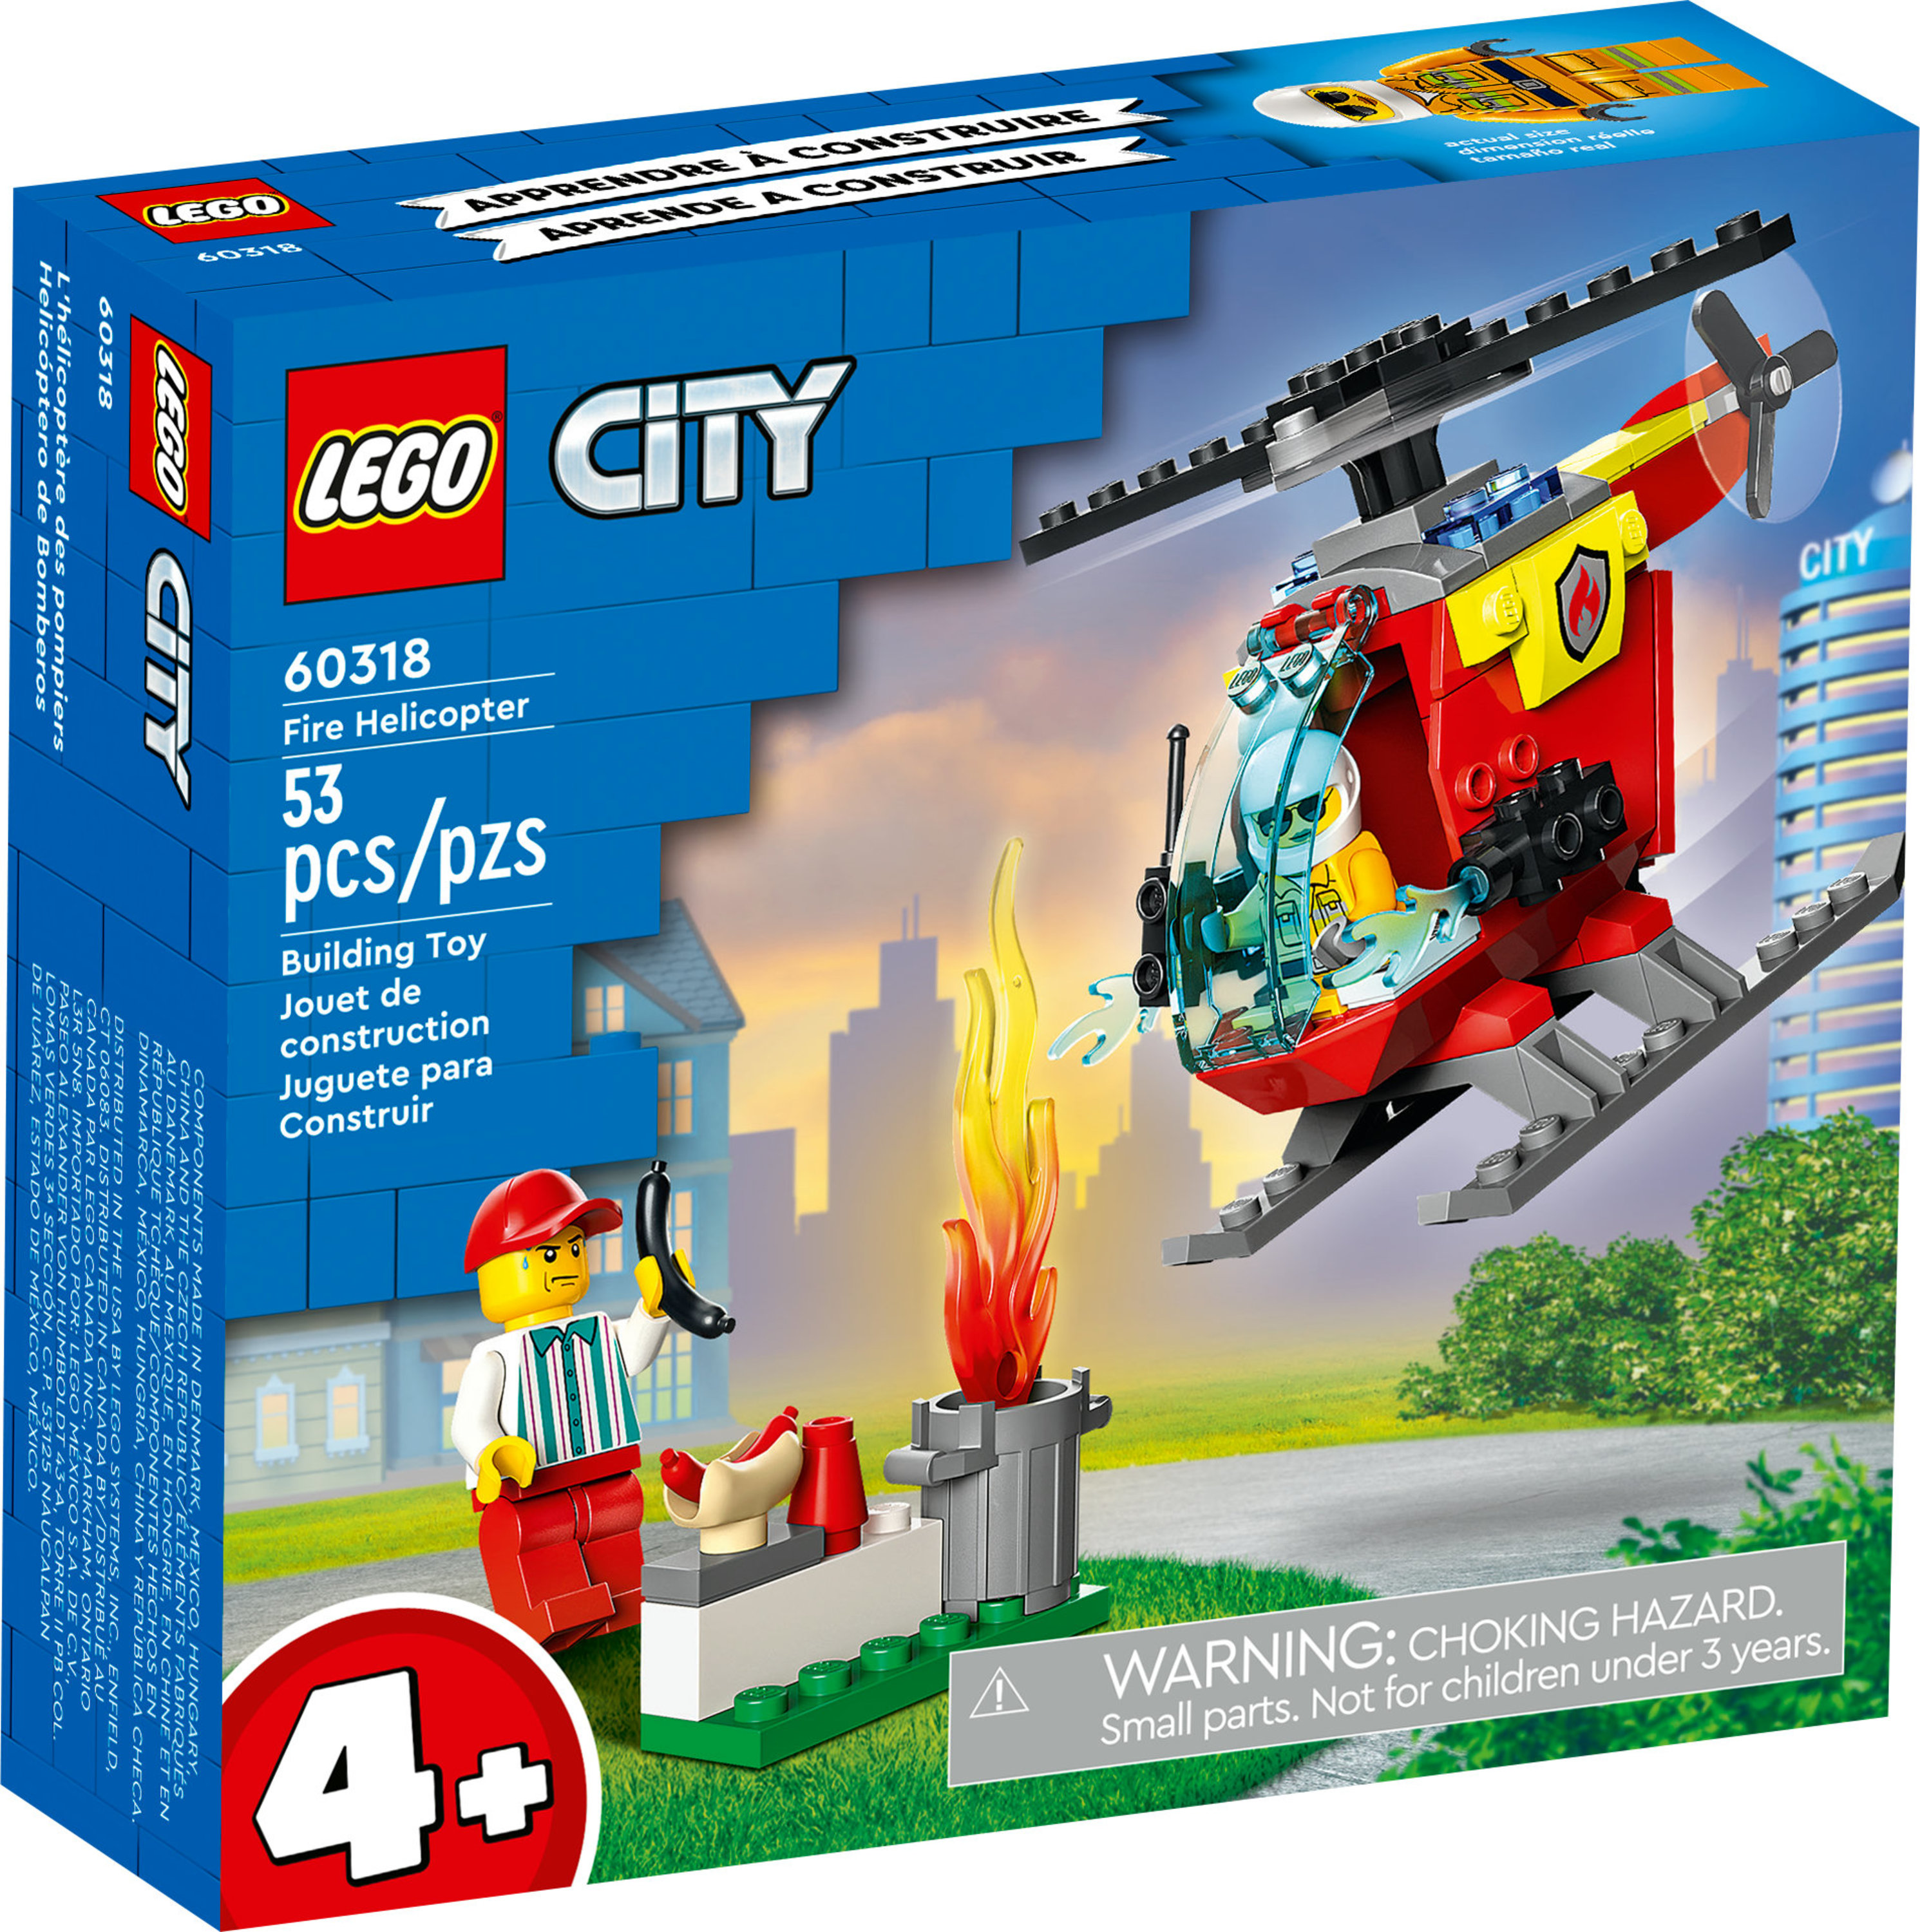 LEGO City Fire Helicopter Toy 60318 for Preschool Kids, Boys and Girls 4 plus Years Old, with Firefighter Minifigure & Starter Brick - image 3 of 8